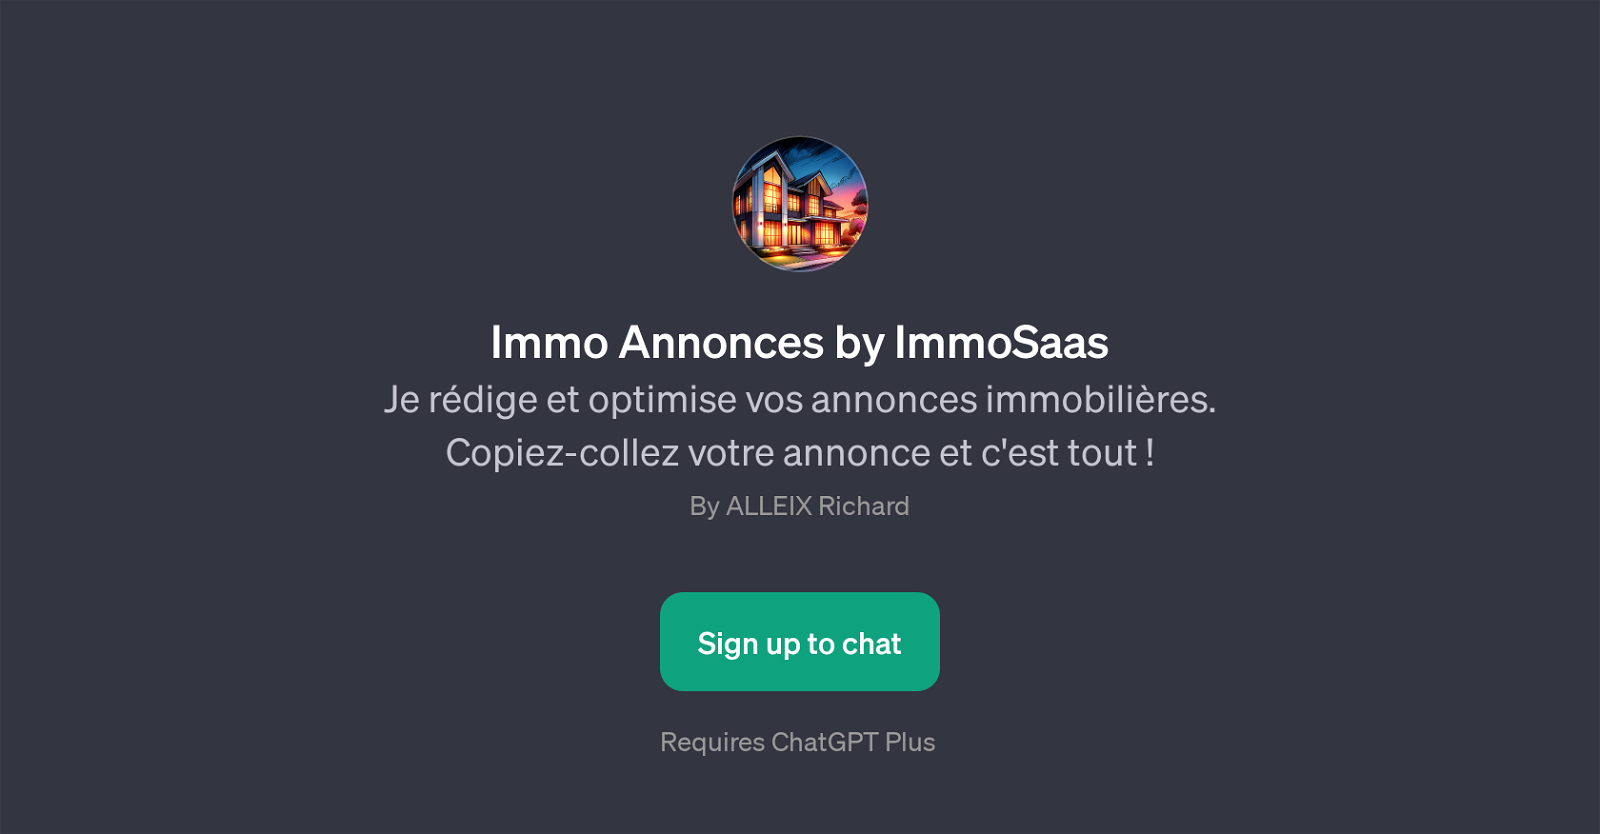 Immo Annonces by ImmoSaas website